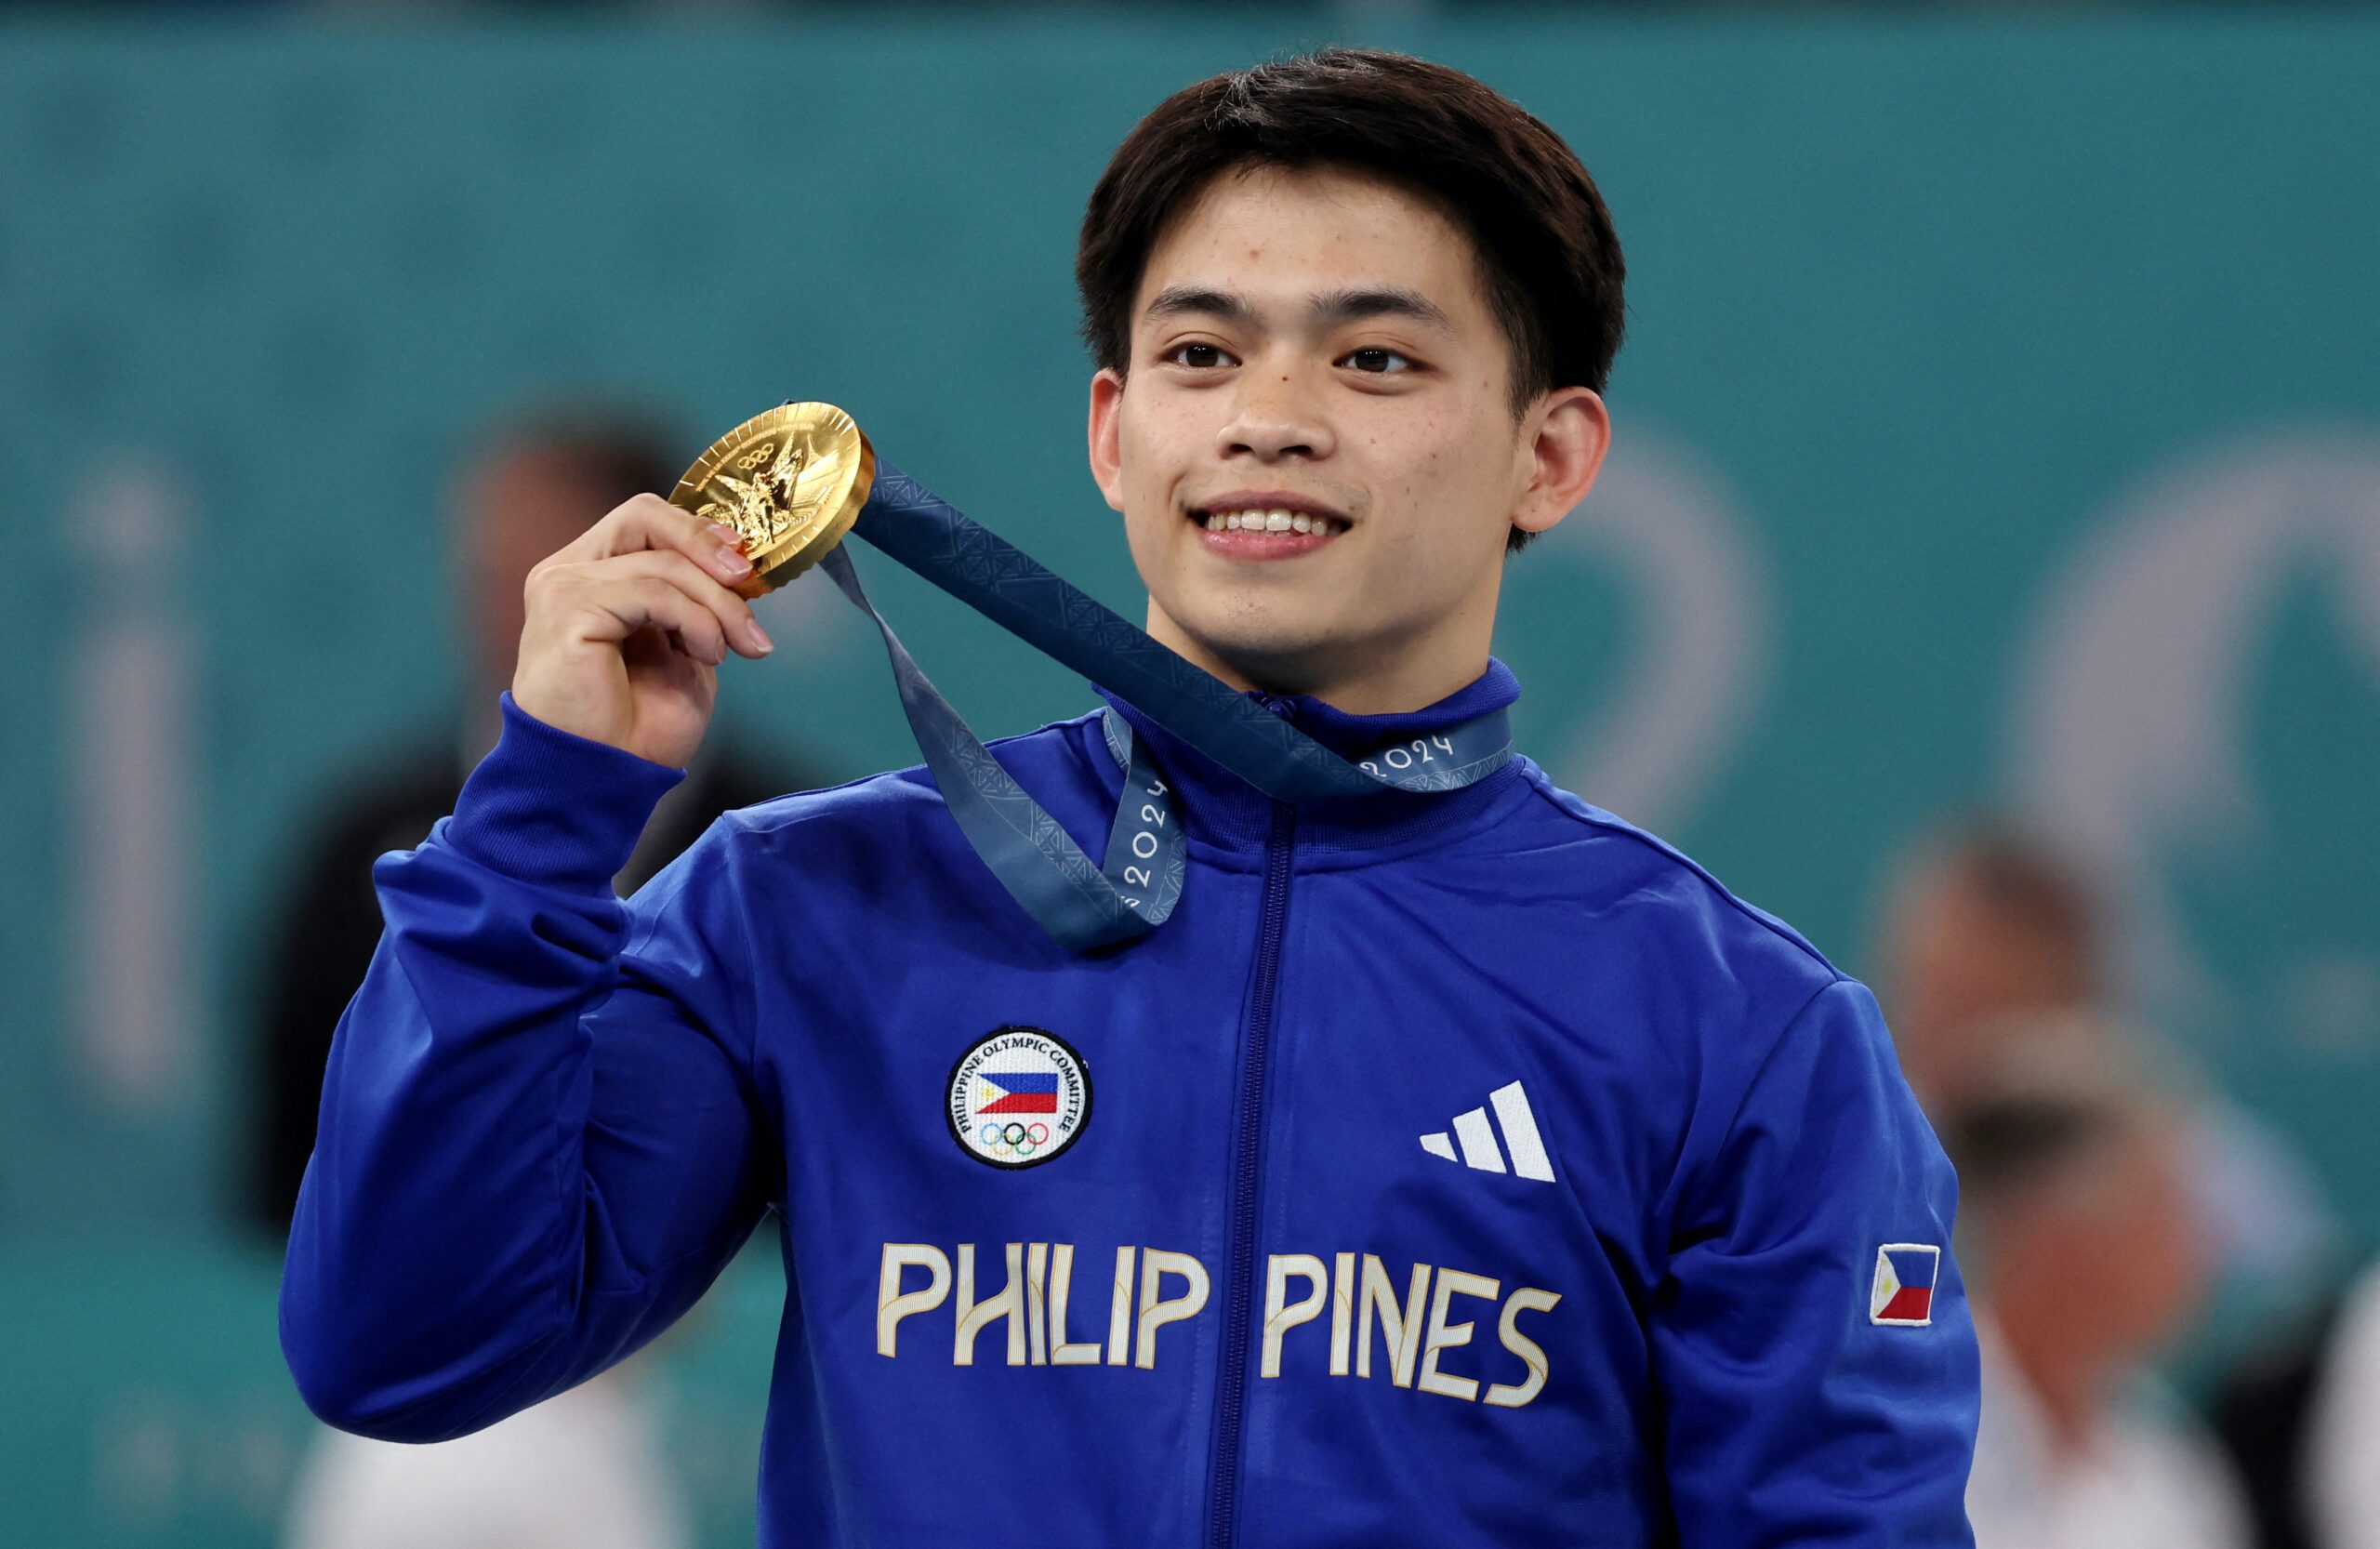 IN PHOTOS: Carlos Yulo relishes golden Olympic moment